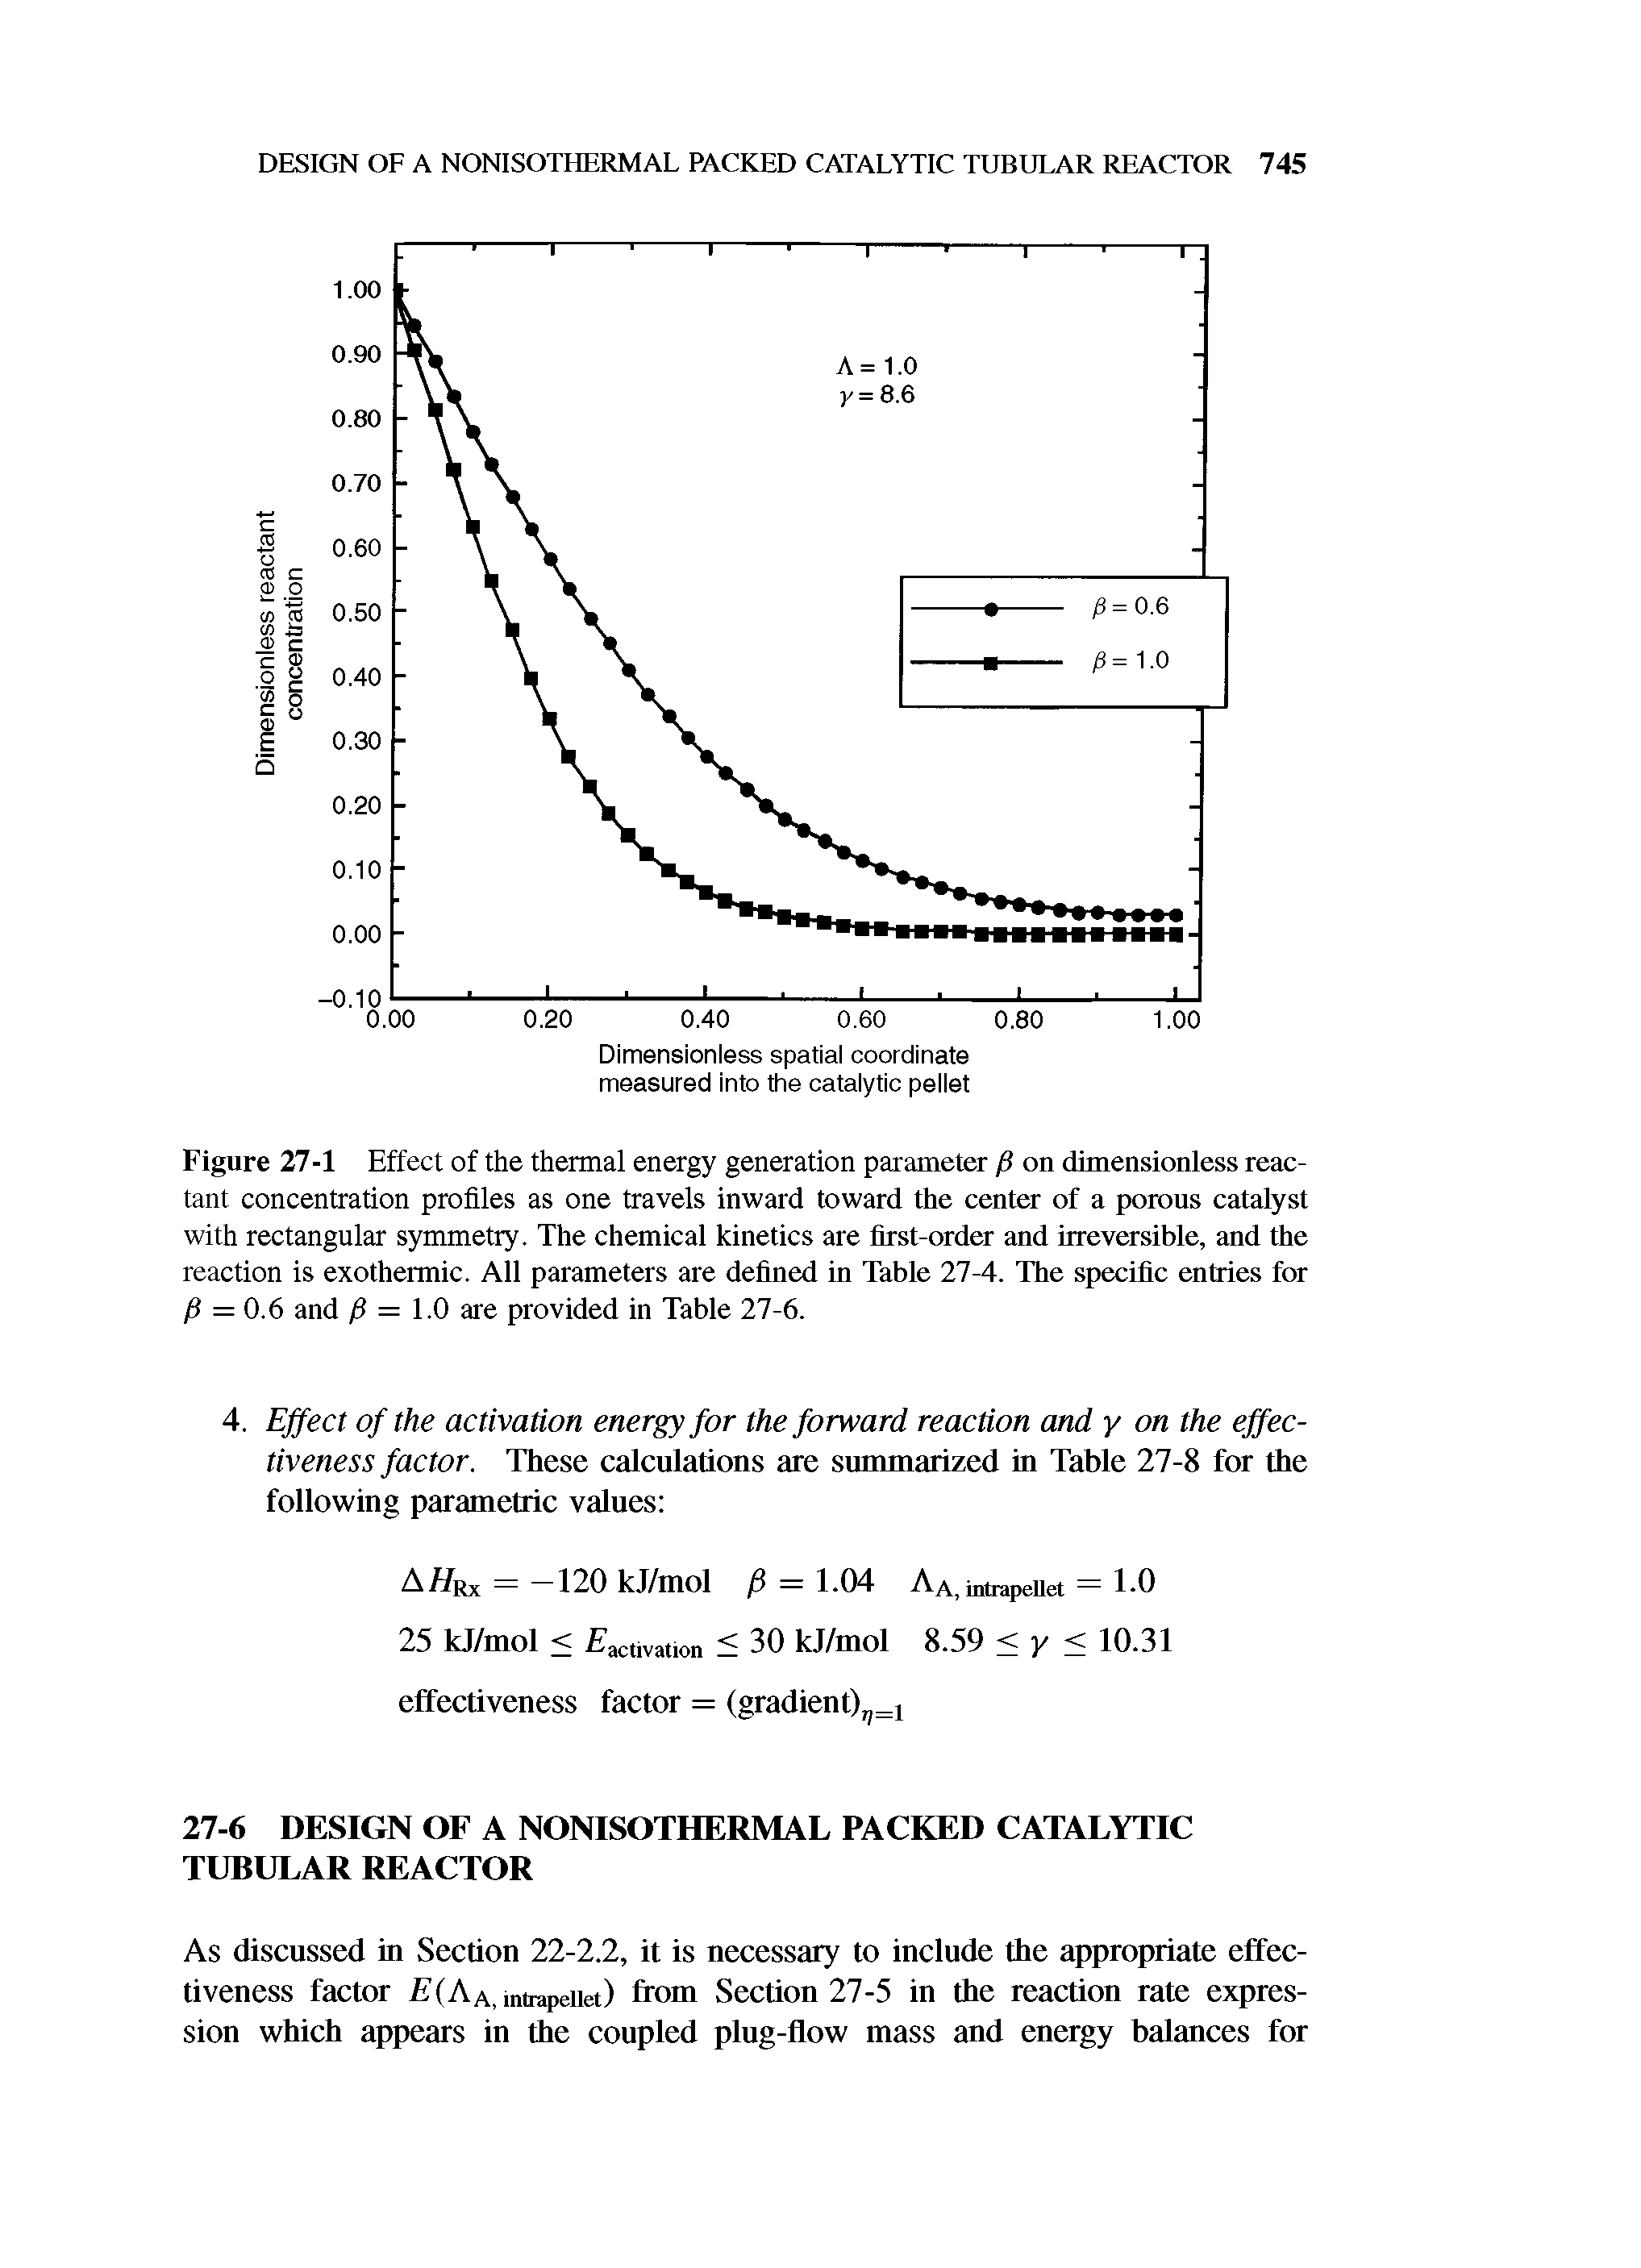 Figure 27-1 Effect of the thermal energy generation paramete on dimensionless reactant concentration profiles as one travels inward toward the center of a porous catalyst with rectangular symmetry. The chemical kinetics are first-order and irreversible, and the reaction is exothermic. All parameters are defined in Table 27-4. The specific entries for P = 0.6 and = 1.0 are provided in Table 27-6.